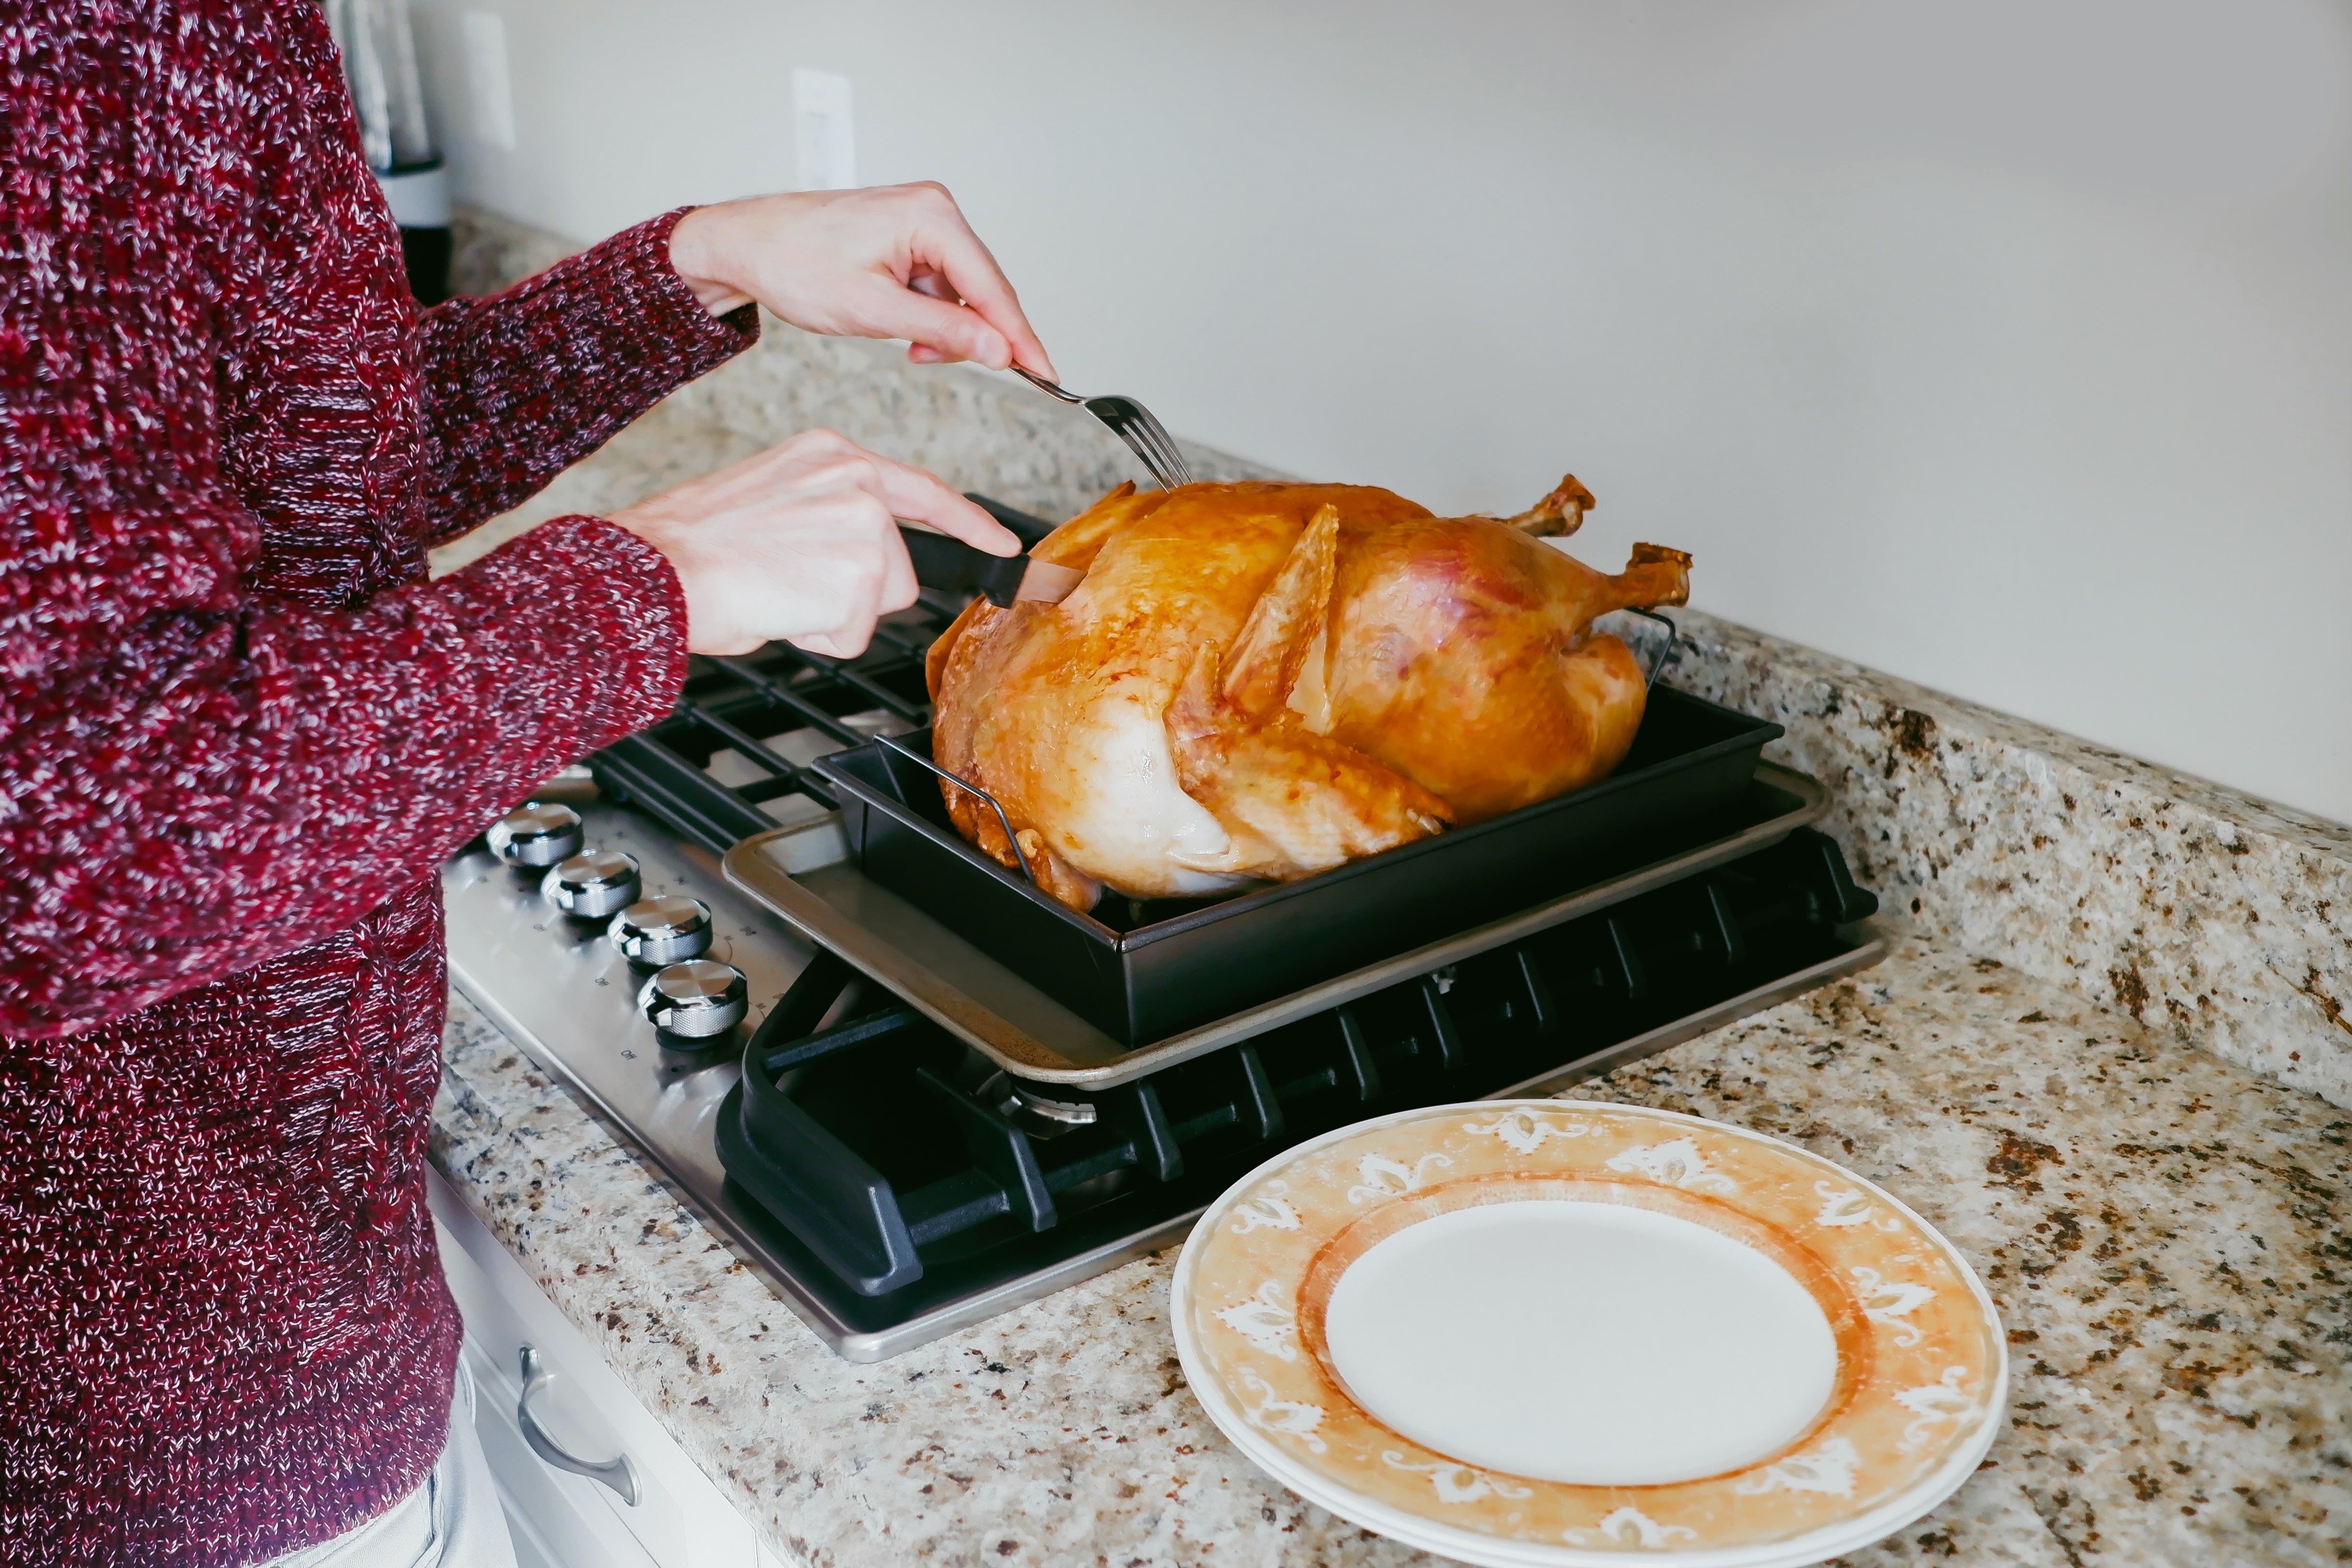 This gadget was built to help you cook turkey. Why do kitchen